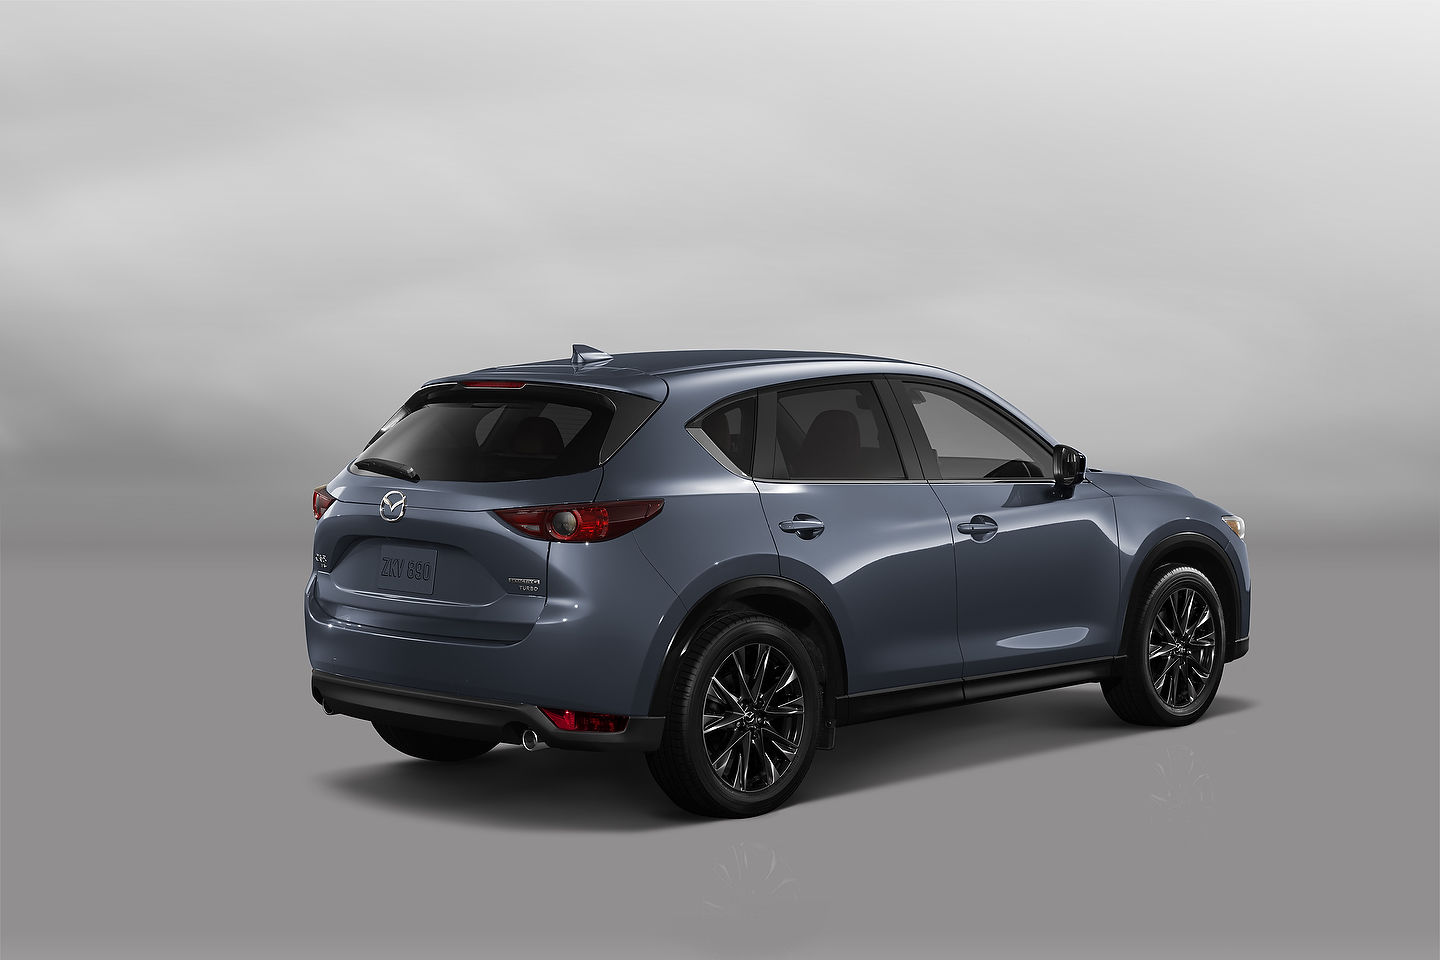 2021.5 Mazda CX-5 Versions and Pricing